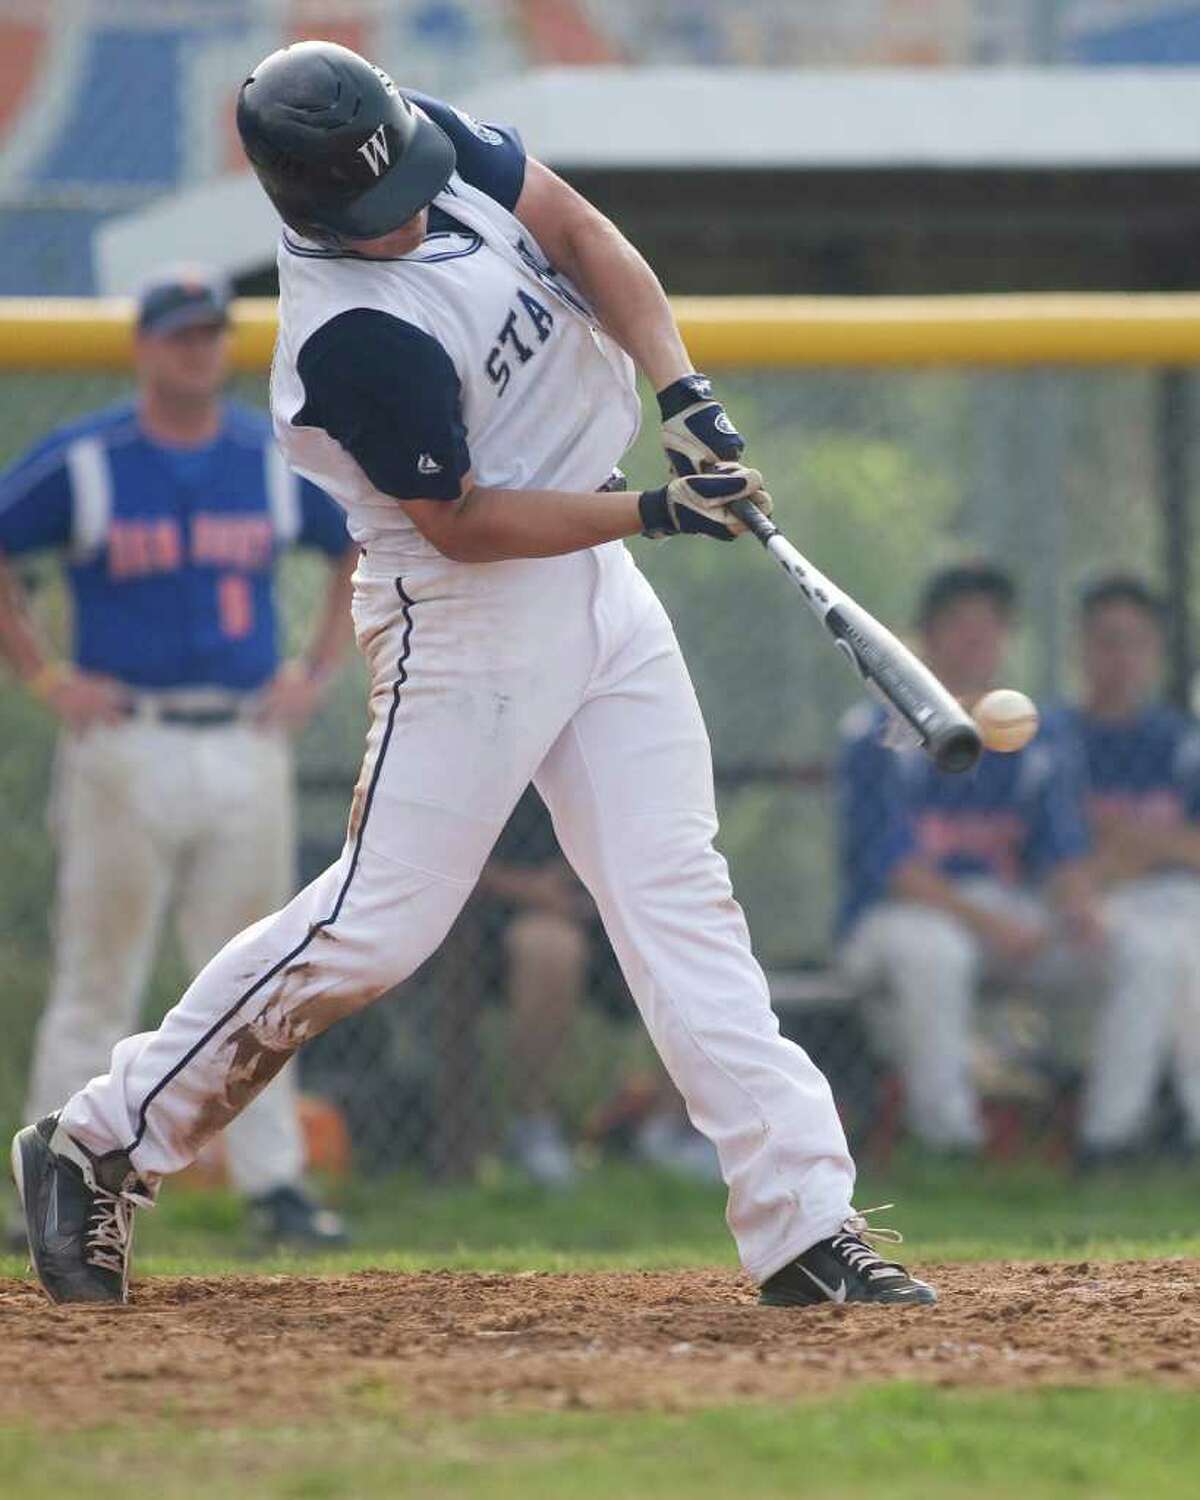 Staples' Brian Terzian makes contact on a pitch against Danbury during the Class LL state tournament second round game Wednesday at Danbury High School.